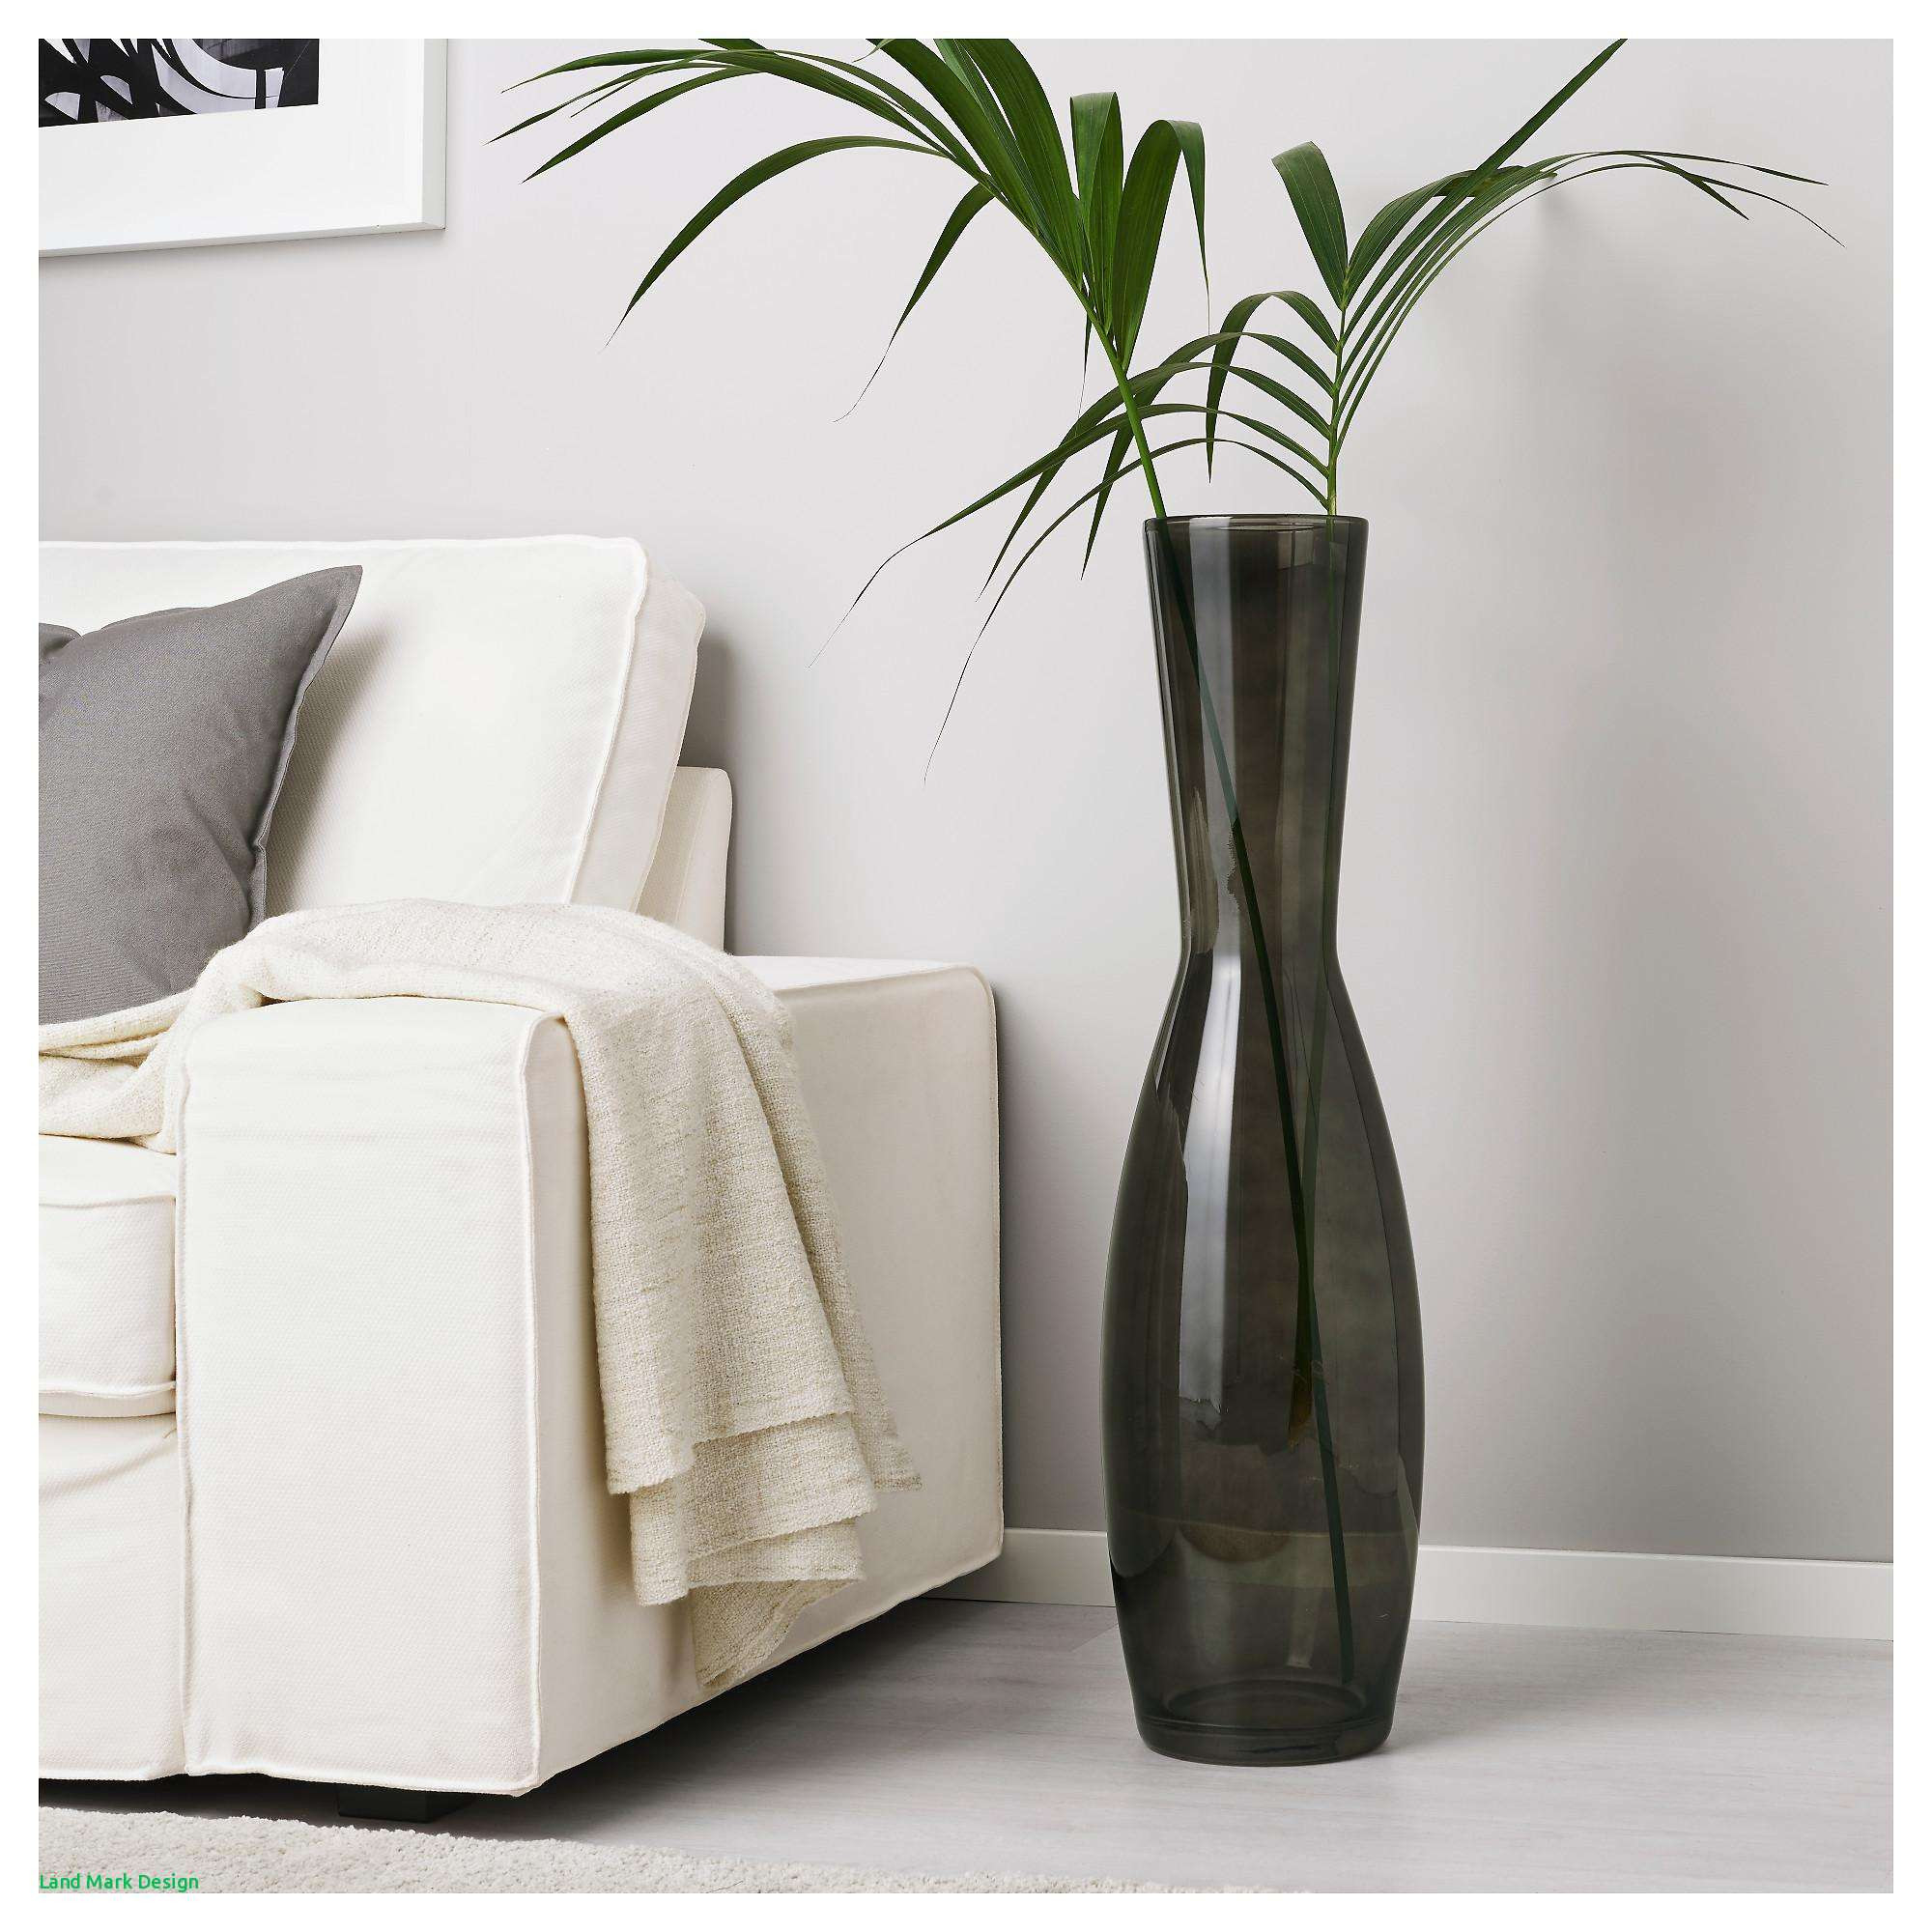 Extra Large Floor Vases - Photos All Recommendation